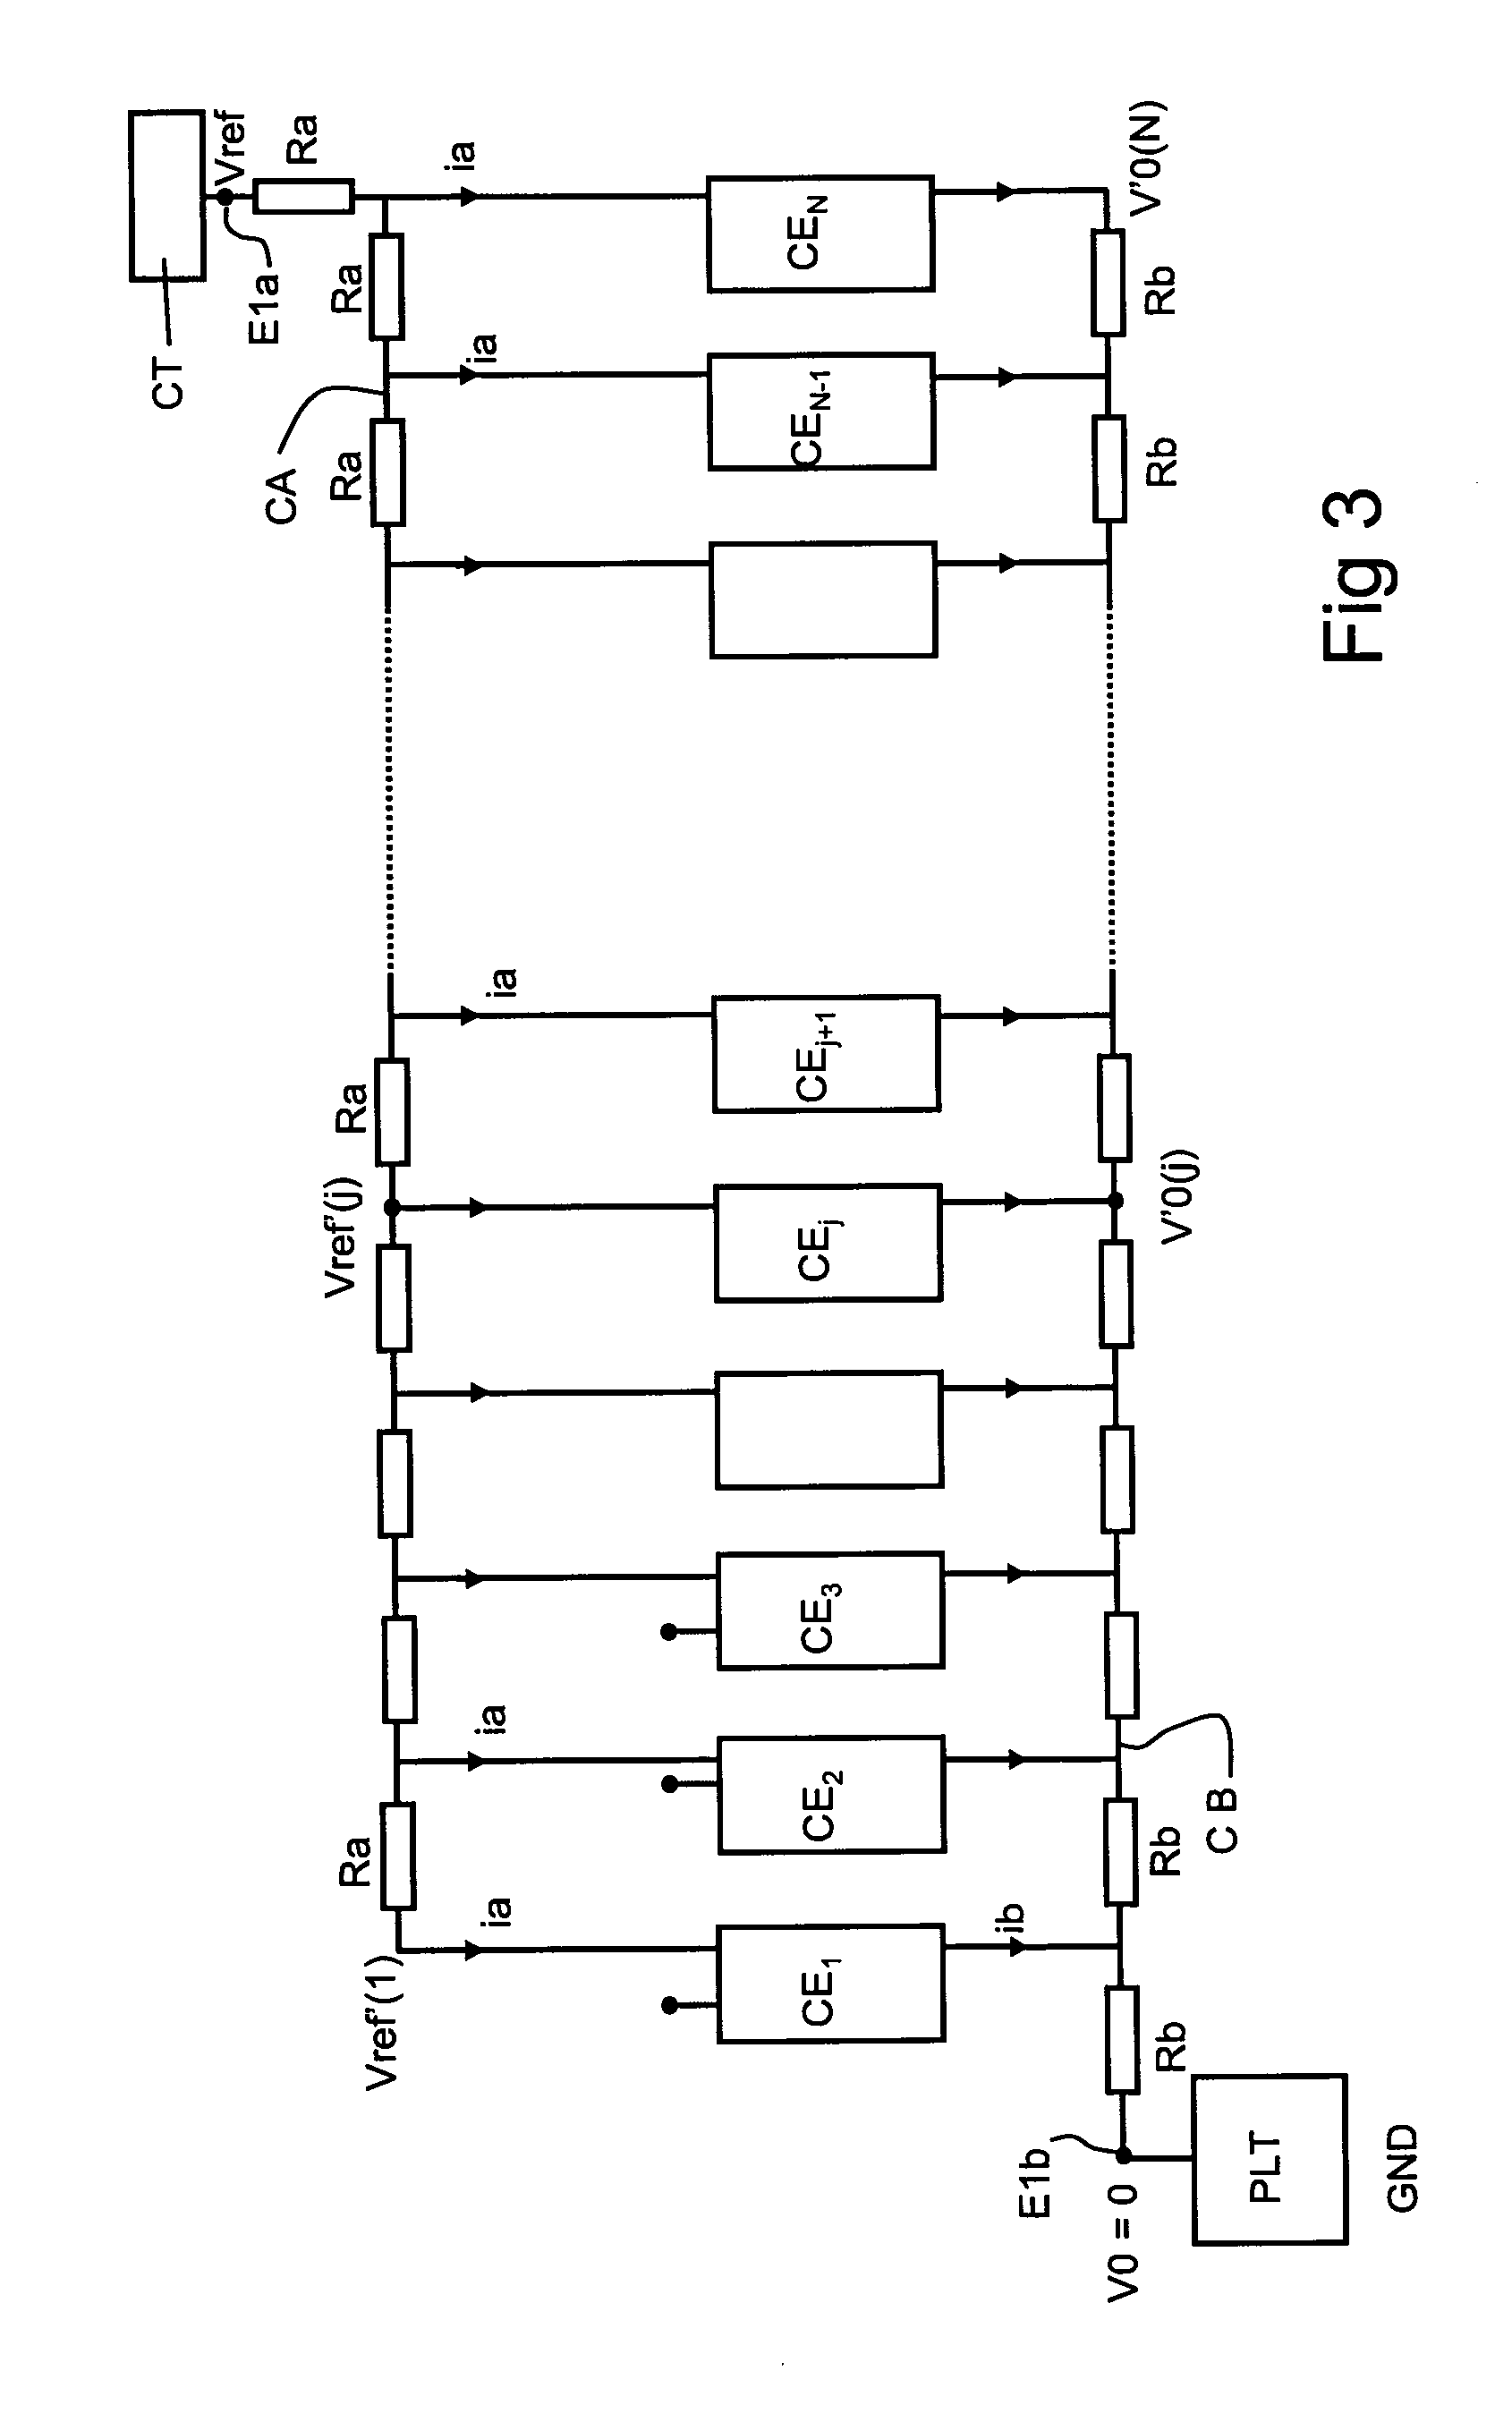 Integrated circuit including a large number of identical elementary circuits powered in parallel